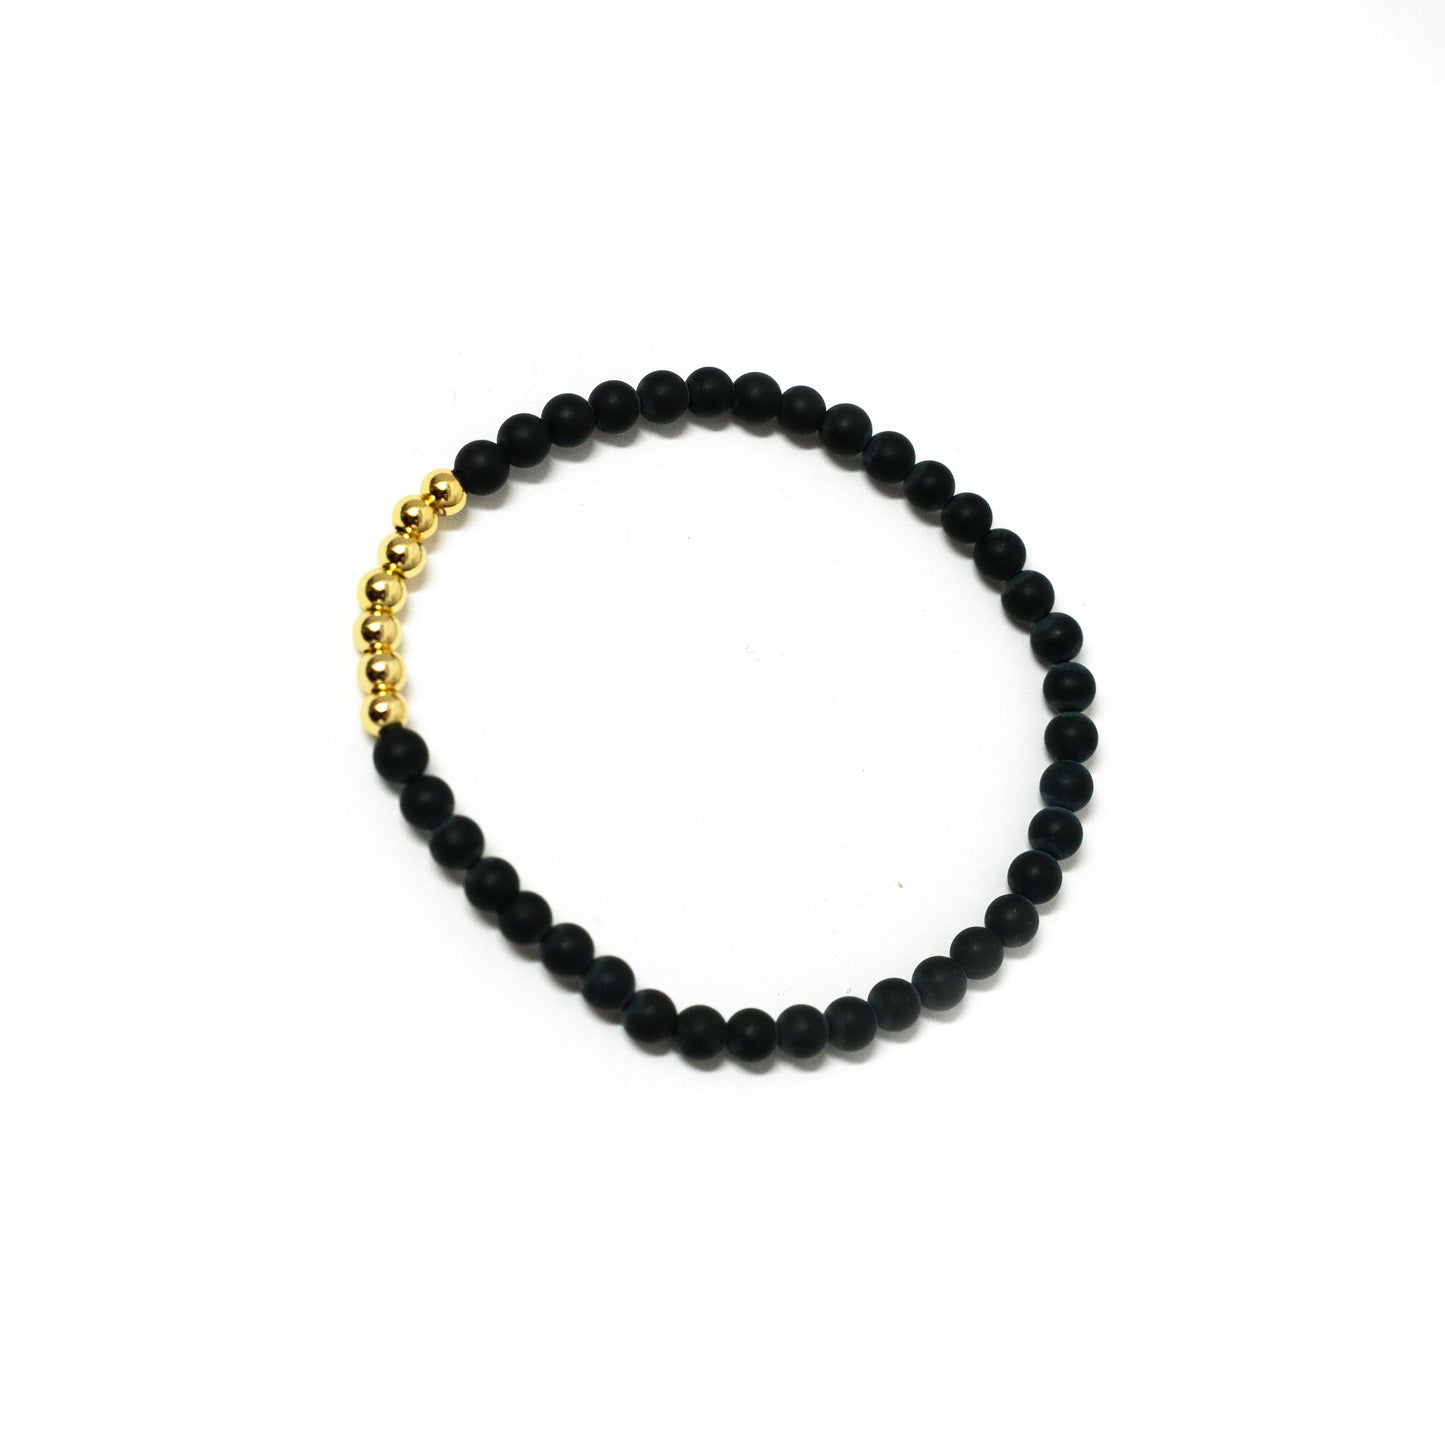 Pearl and Gold Bead Stretch Bracelet JEWELRY The Sis Kiss Black With Gold Accent